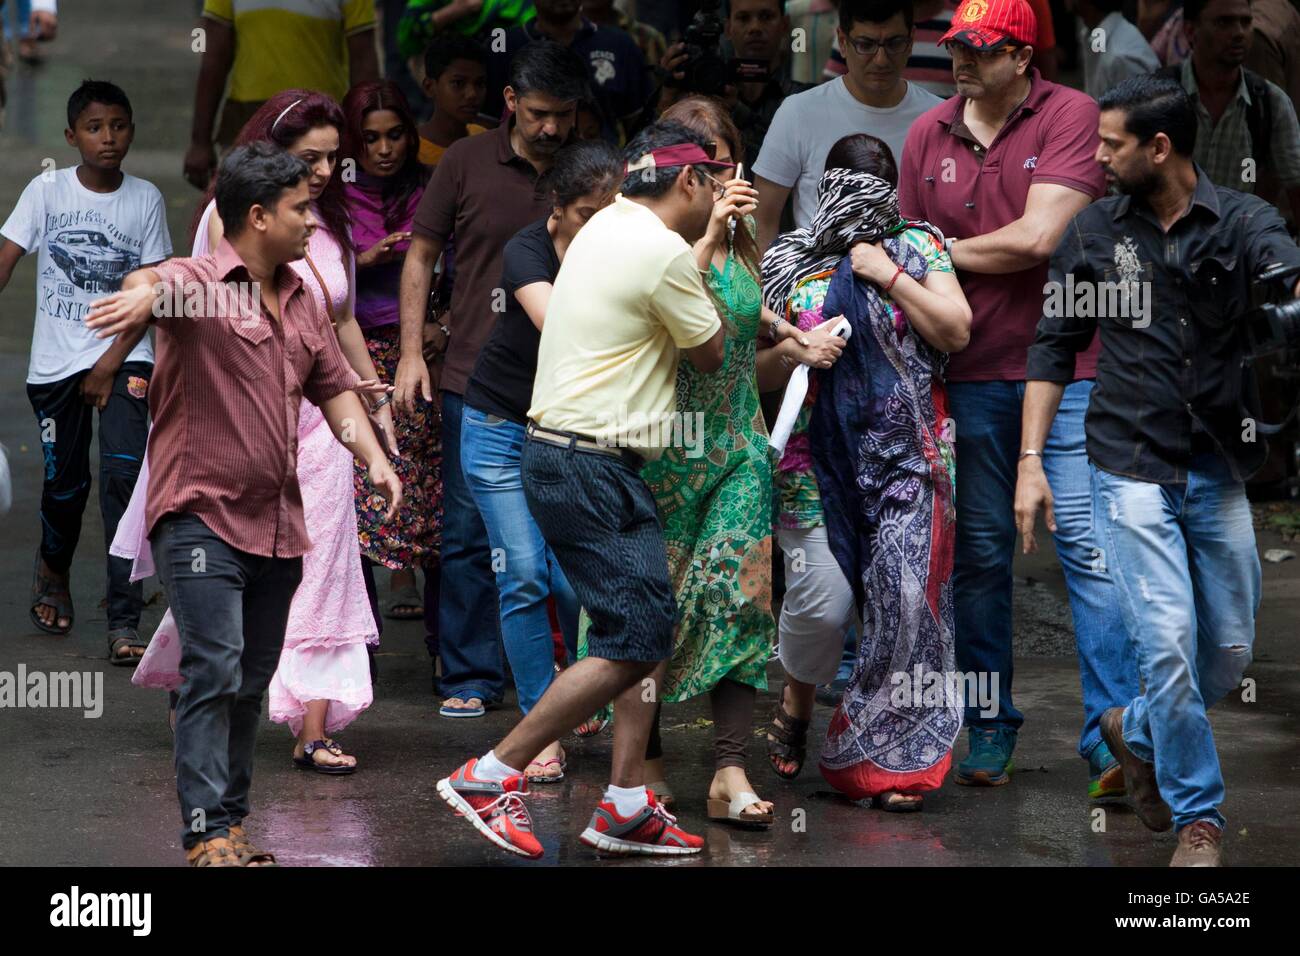 Dhaka, Bangladesh. 2nd July, 2016. Relatives of a hostage seeking news near from the Holey Artisan Bakery. Six gunmen have been shot and killed during an operation to end a hostage situation by military commandos, while the gunmen killed two policemen earlier and thirteen hostages have been rescued. Credit:  K M Asad/ZUMA Wire/Alamy Live News Stock Photo